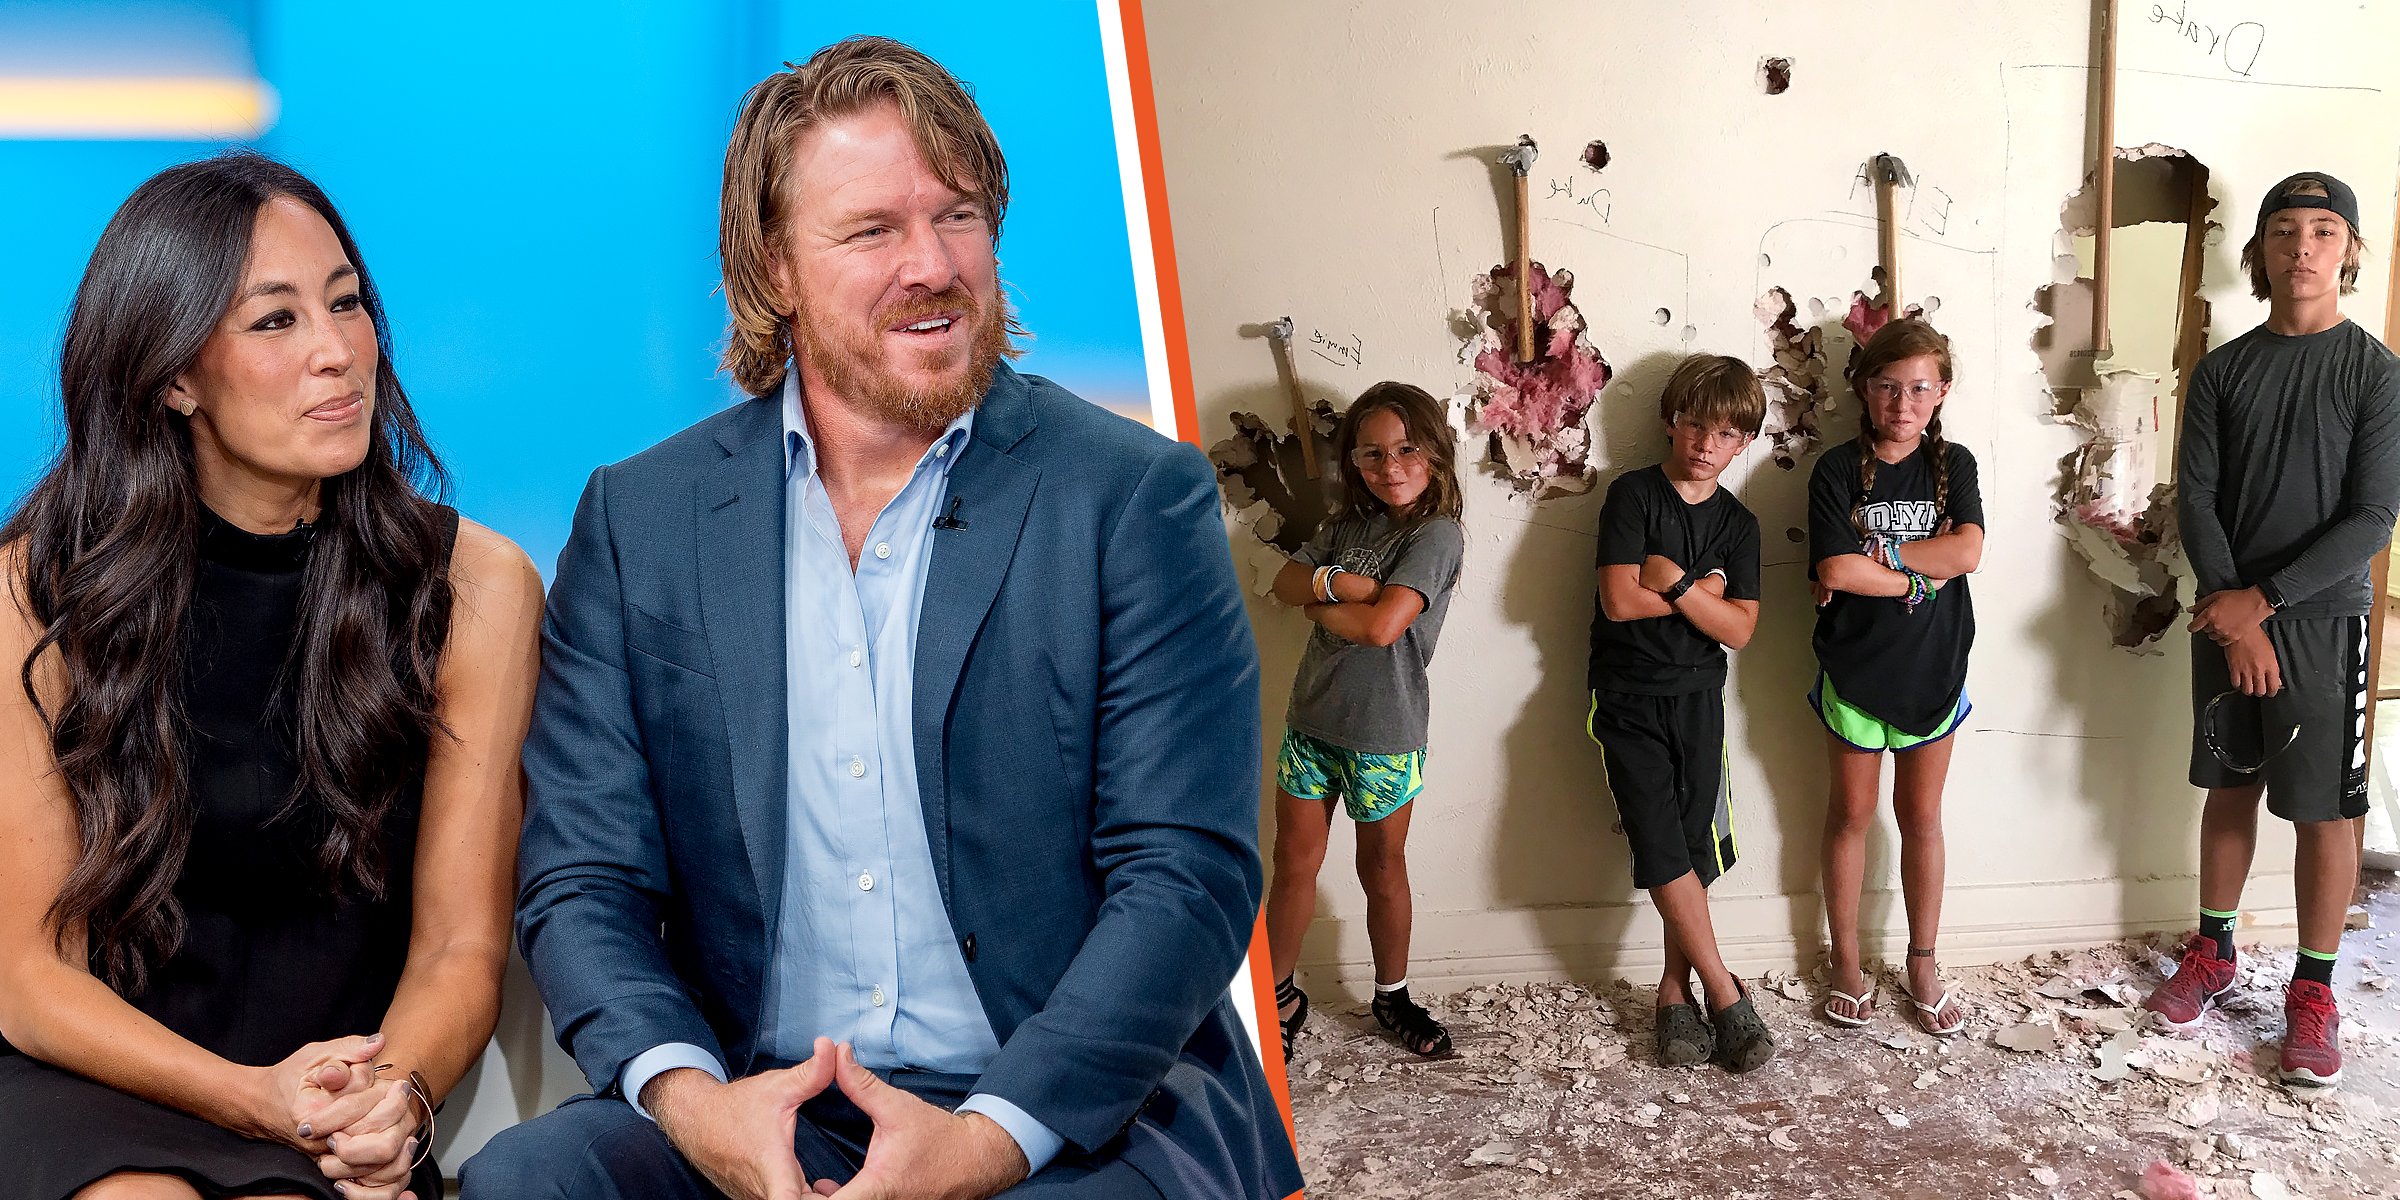 Twitter.com/chipgaines - Getty Images